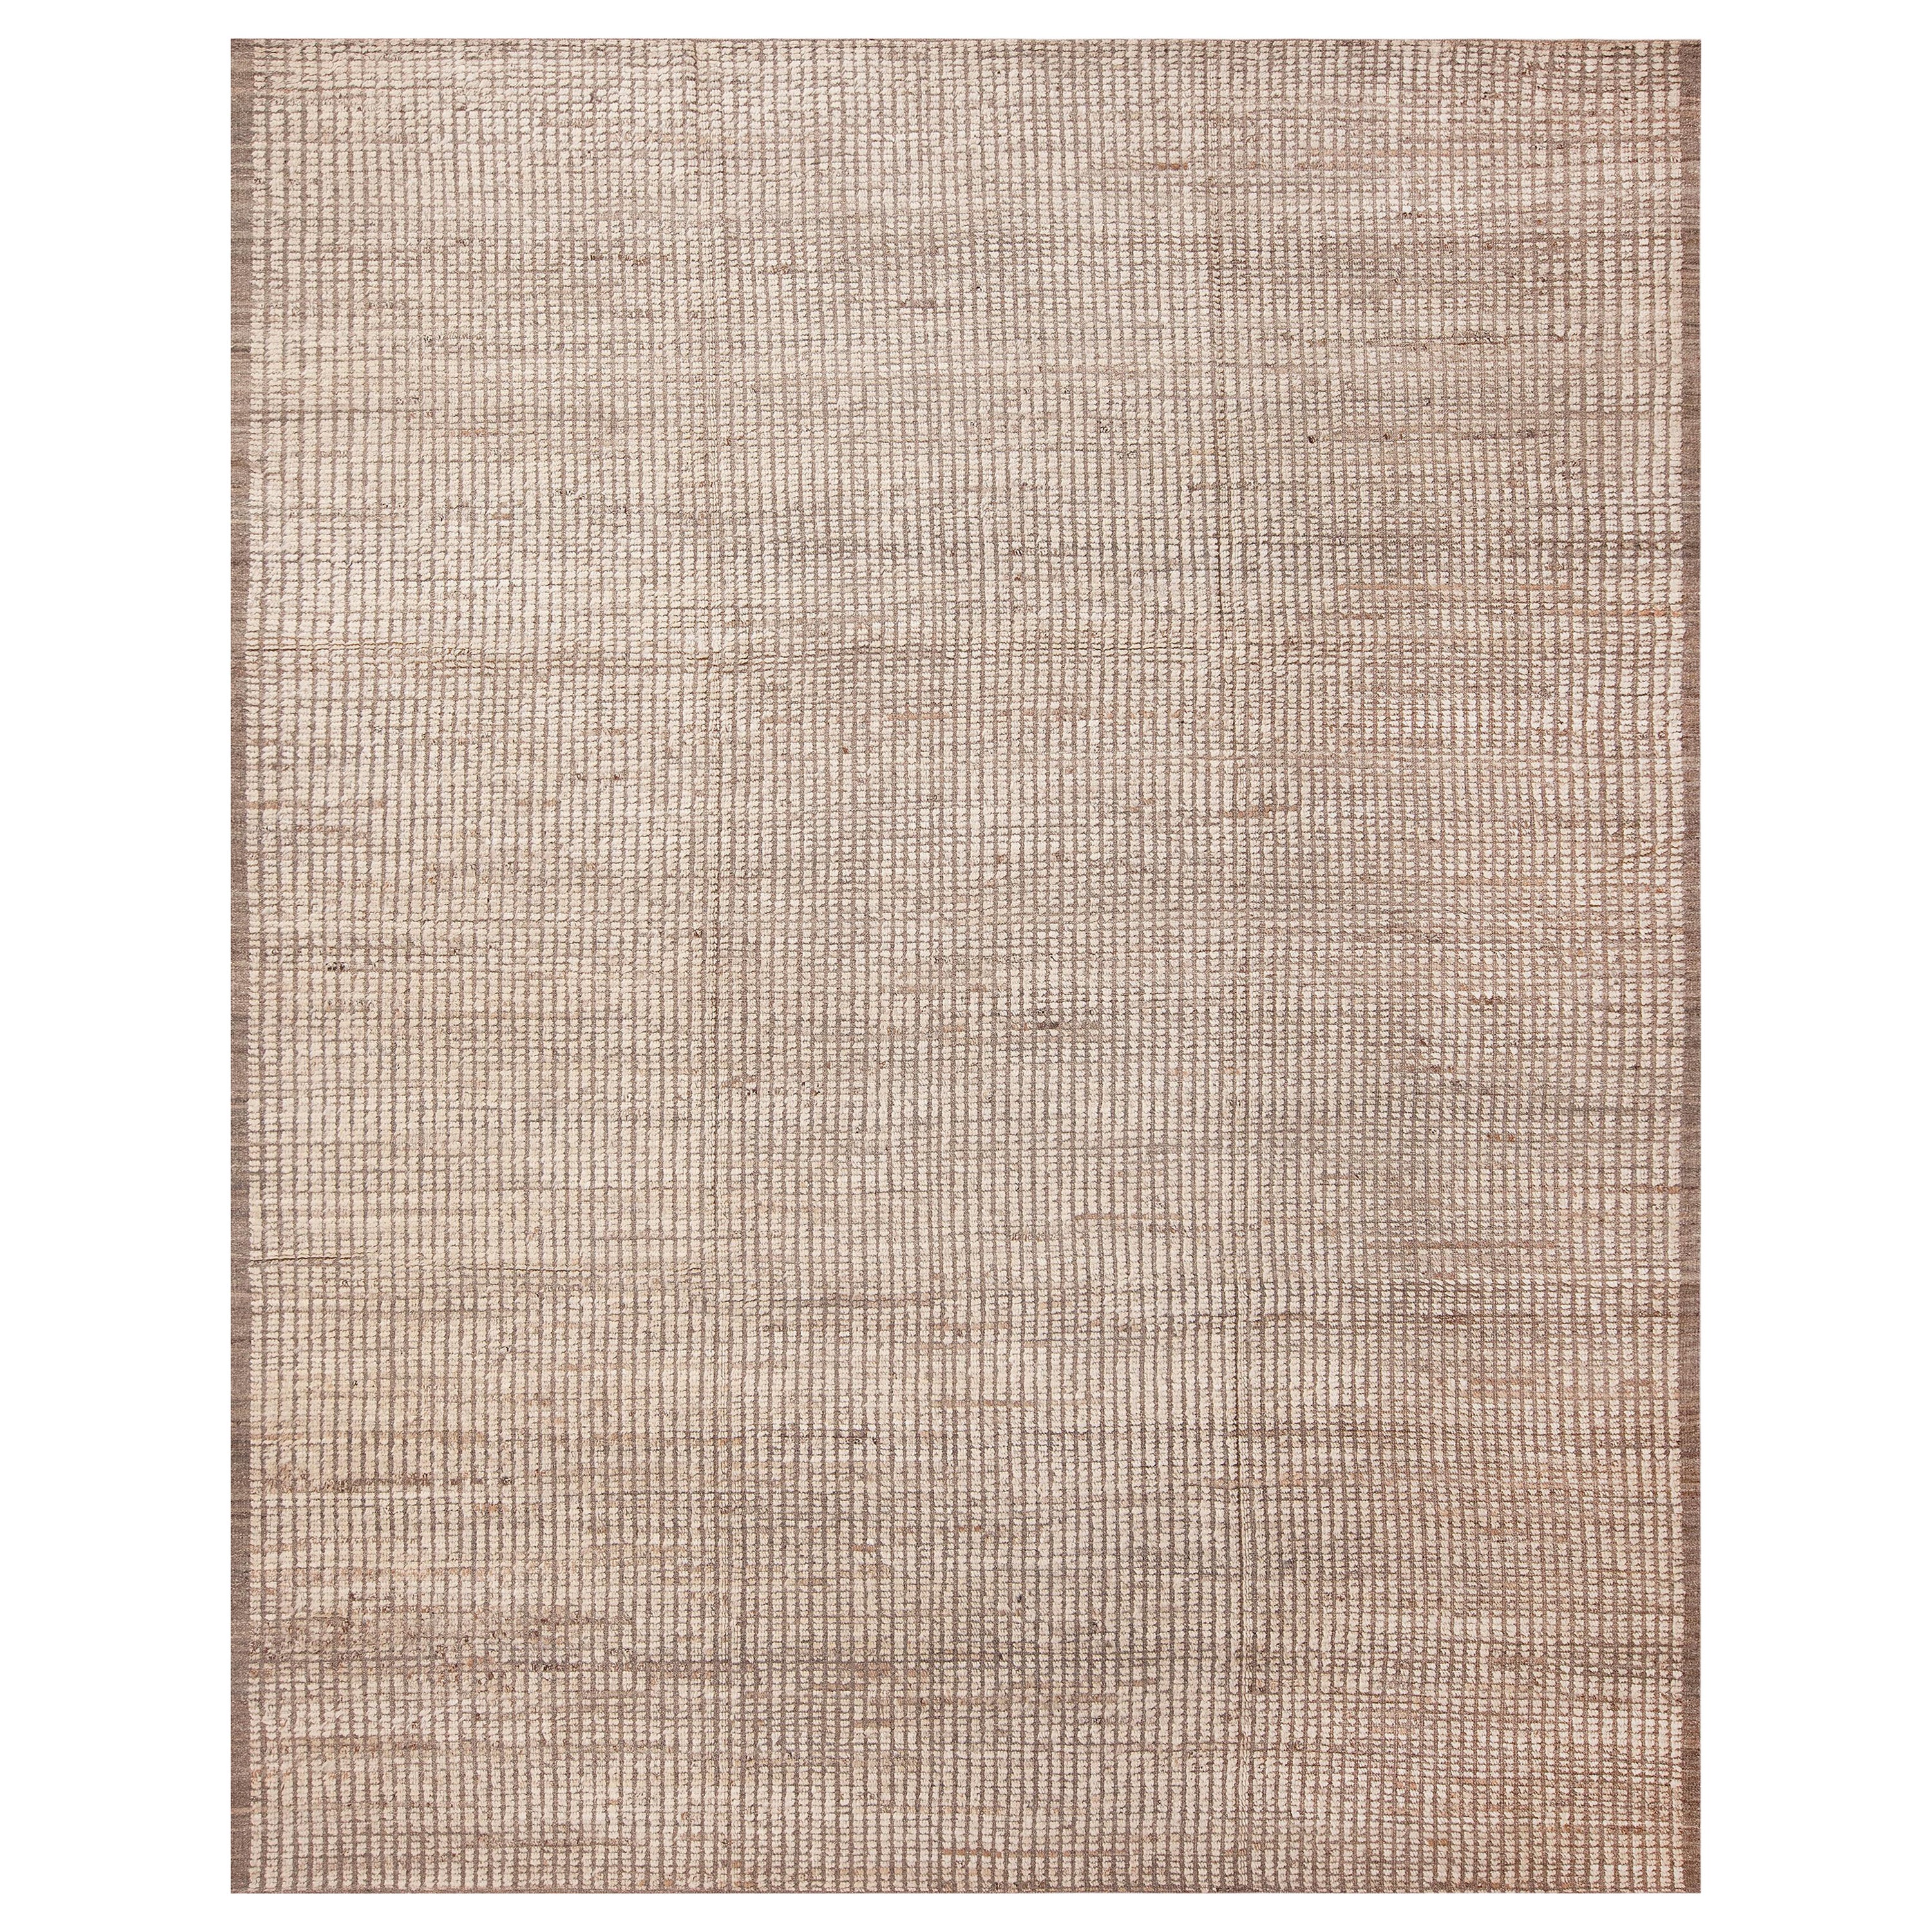 Nazmiyal Collection Contemporary Neutral Minimalist Area Rug 9'7" x 12' For Sale